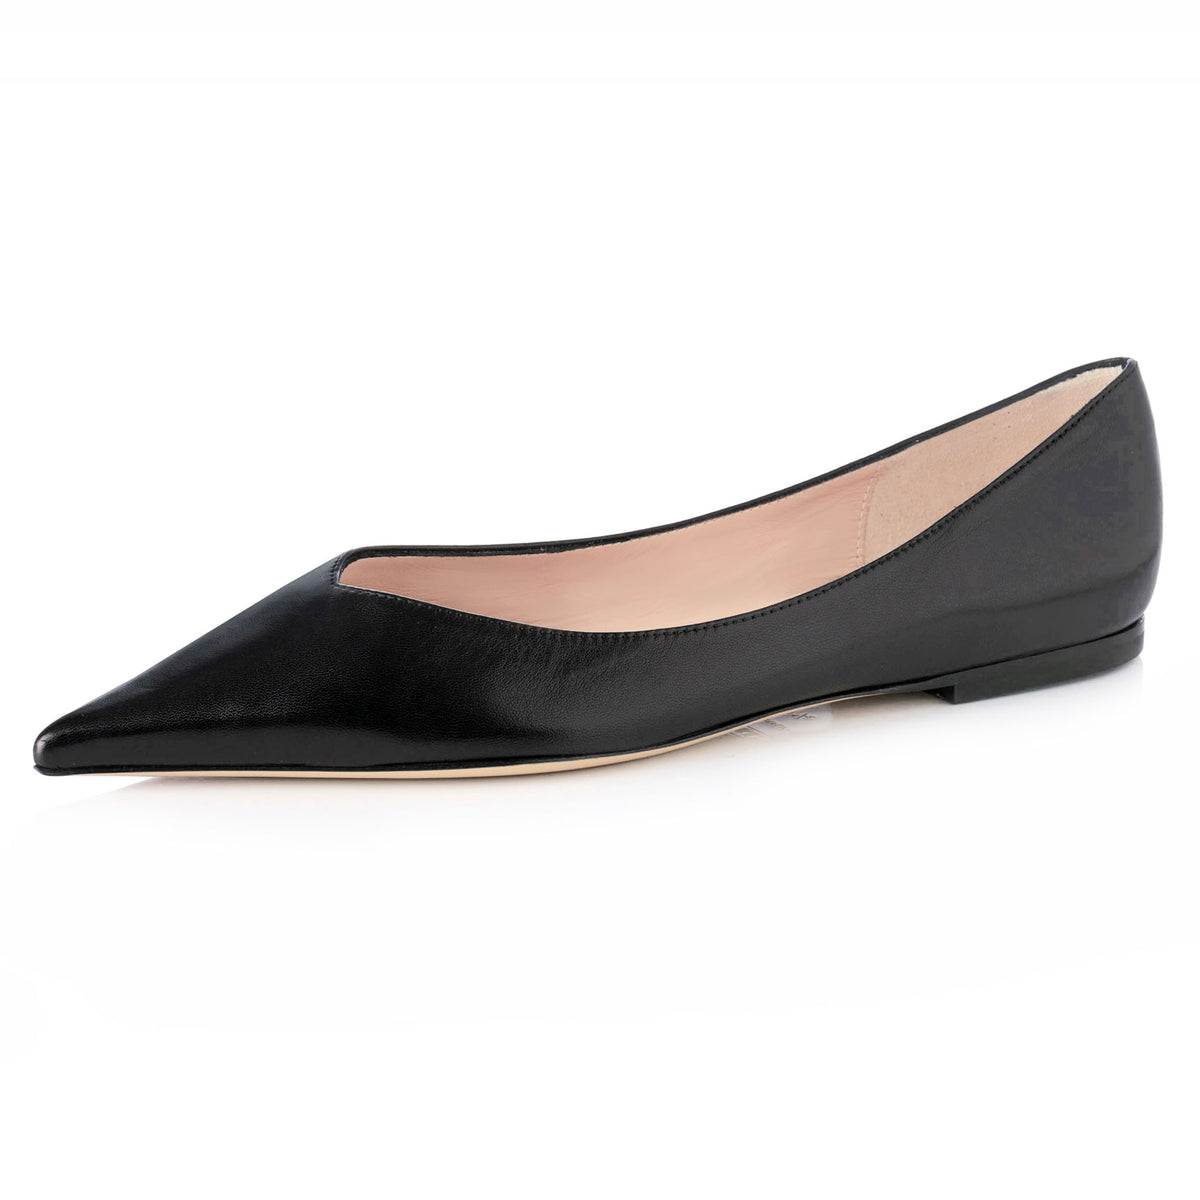 Vivienne Pointed Toe Flats in Black